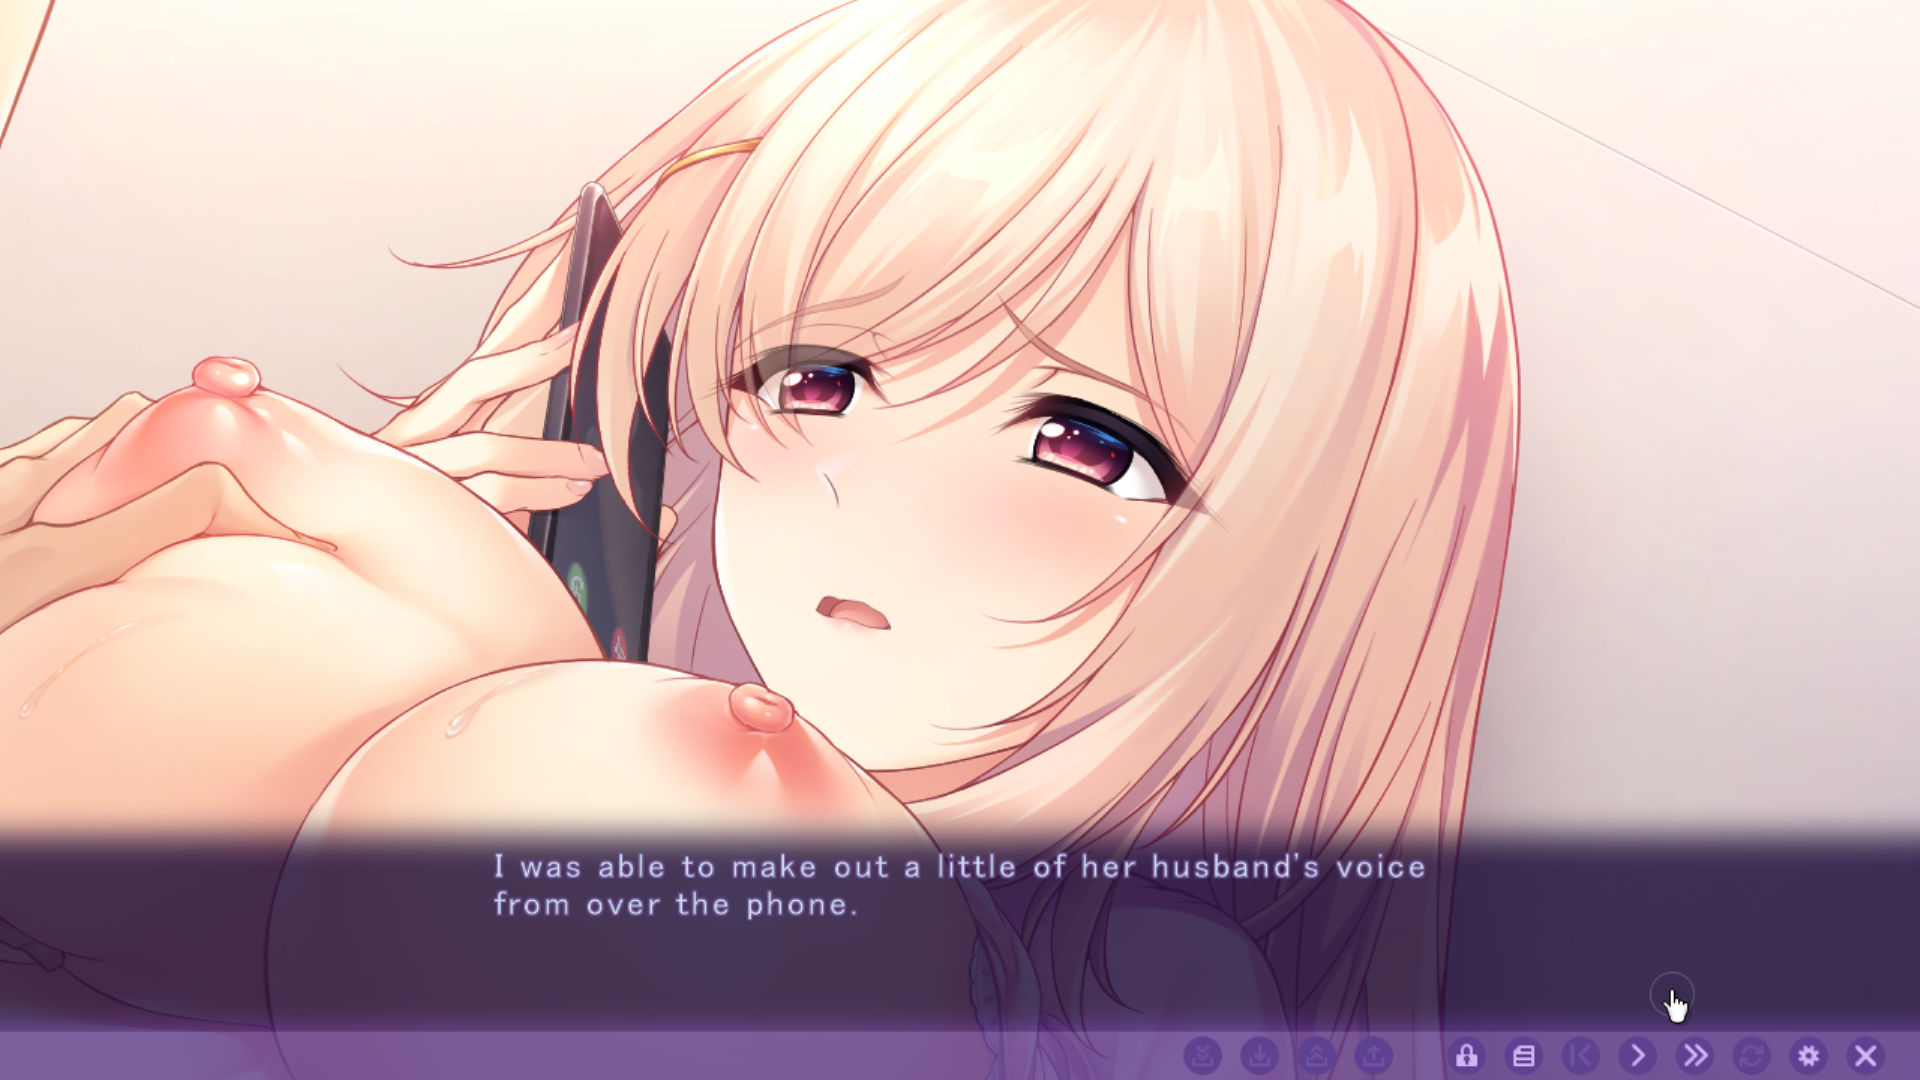 Illicit Love Secret Time with Housewives COMPLETED - free game download, reviews, mega